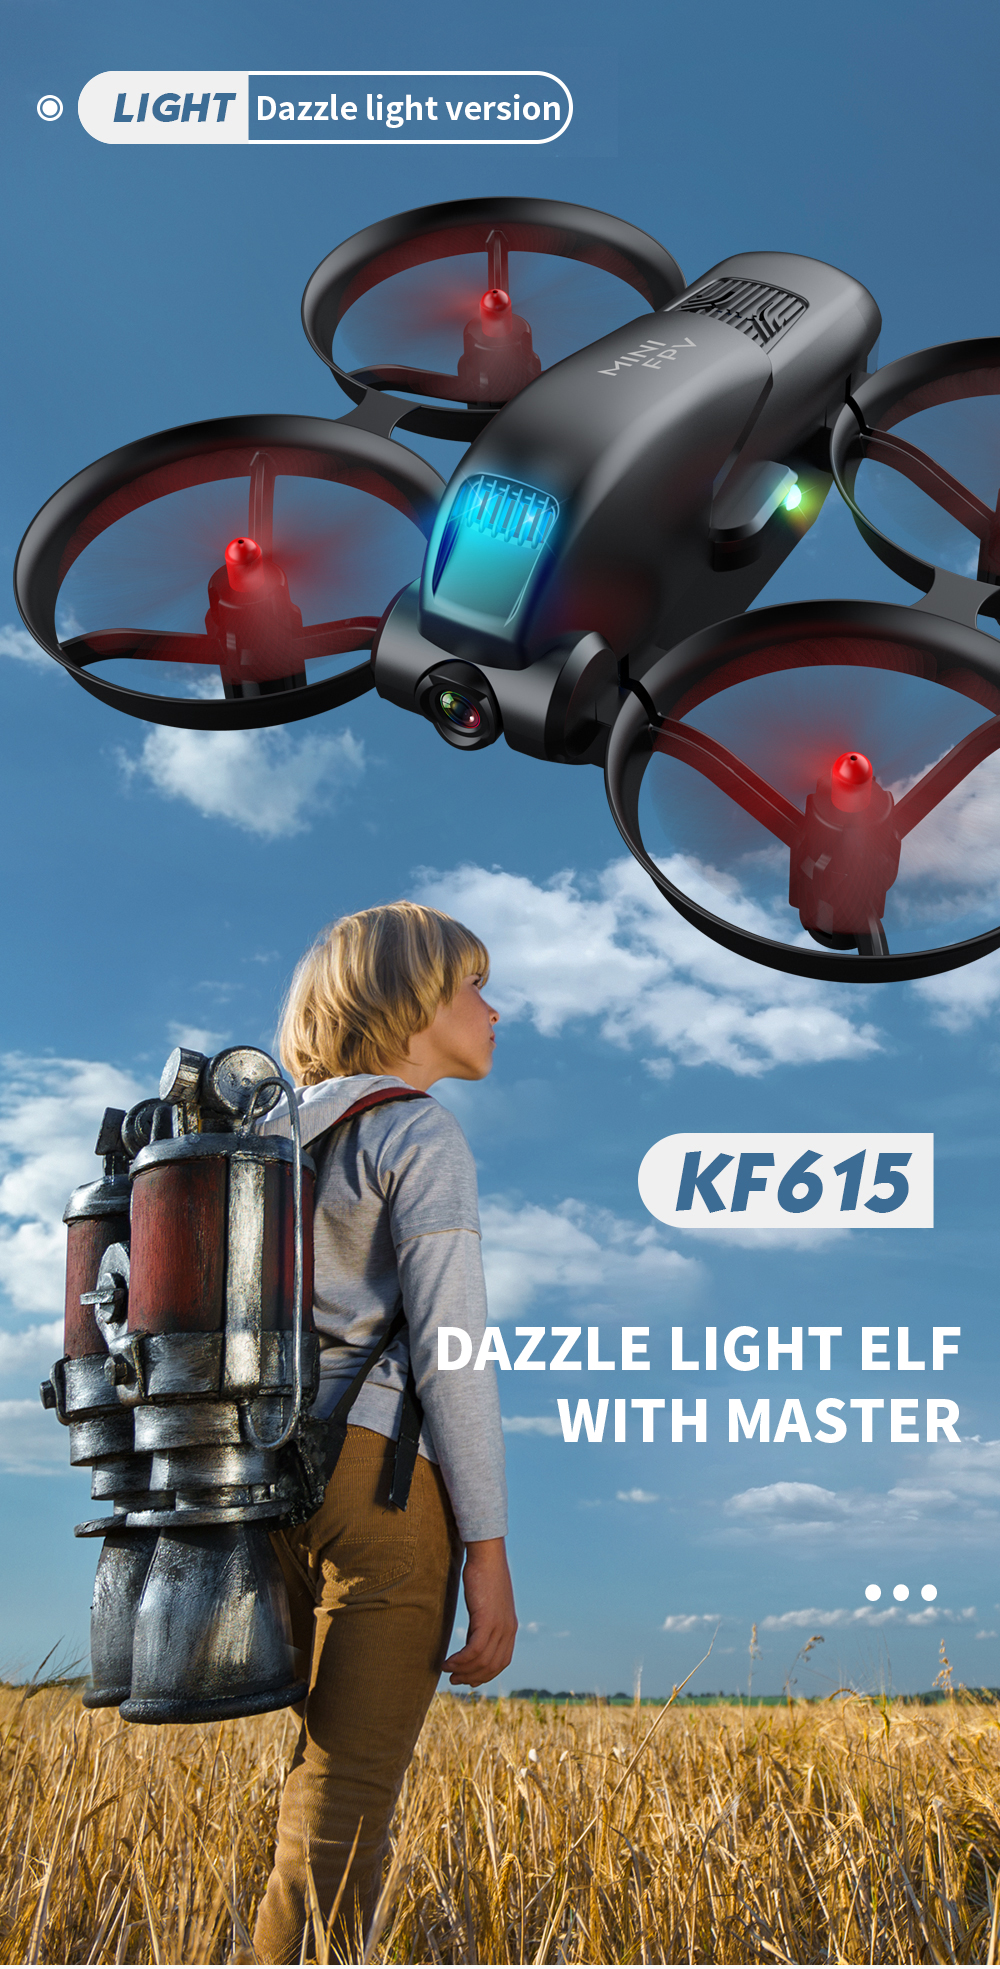 KF615-WIFI-FPV-with-4K-Dual-Camera-Optical-Flow-Positioning-Headless-Mode-Gyro-self-stabilization-RC-1882626-1